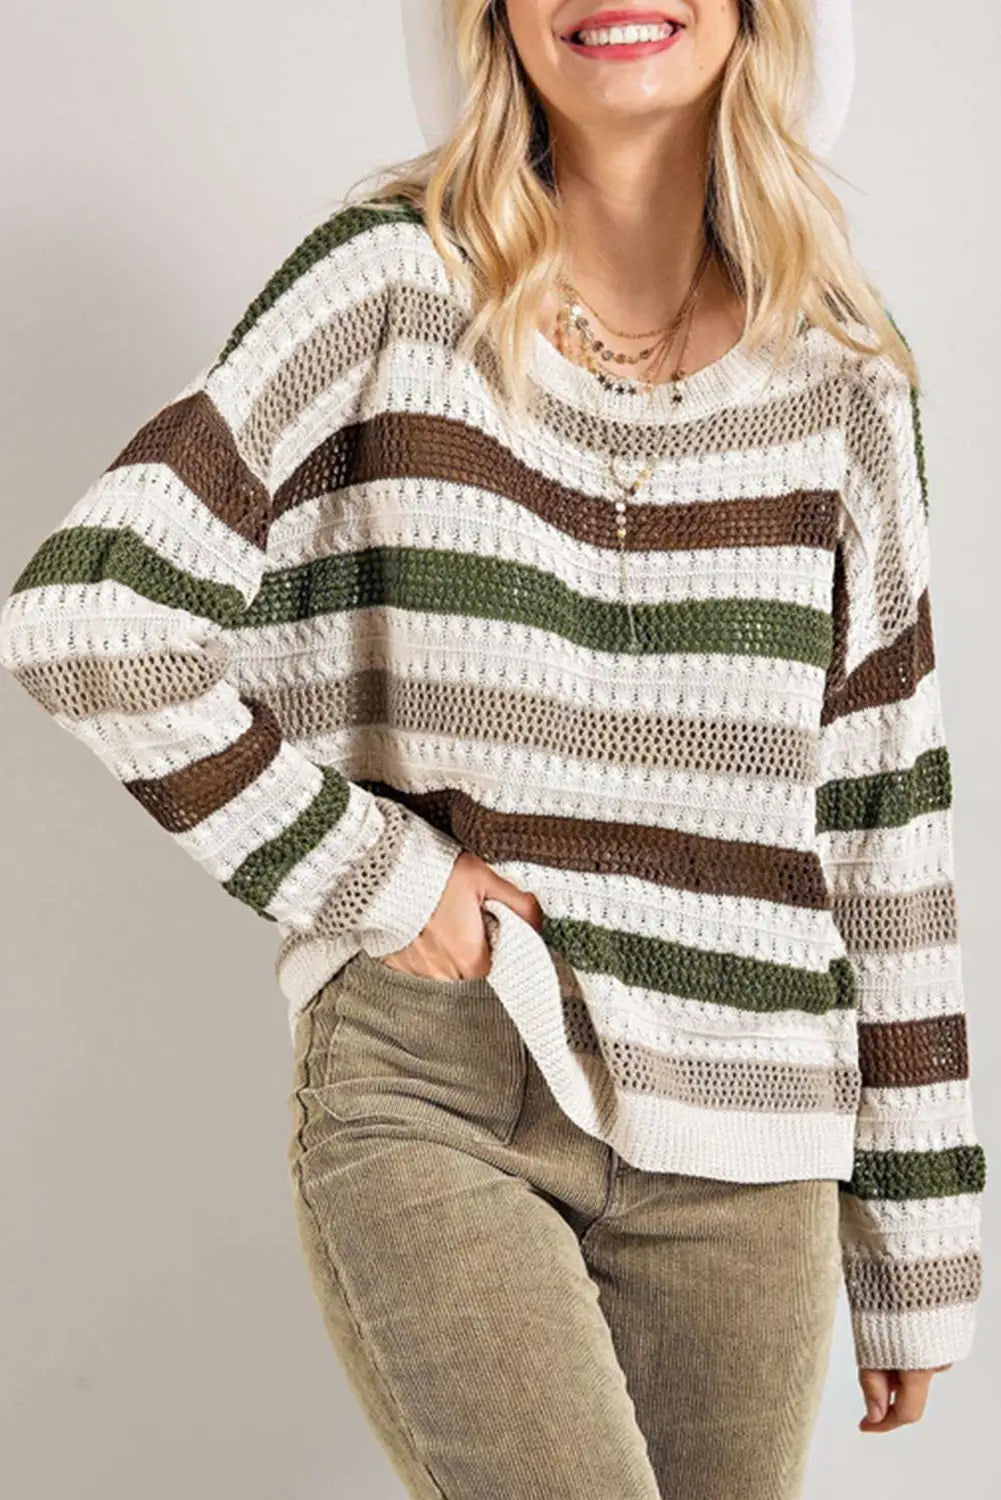 Stripe crochet hollow out knit sweater - s / 55% acrylic + 45% cotton - sweaters & cardigans